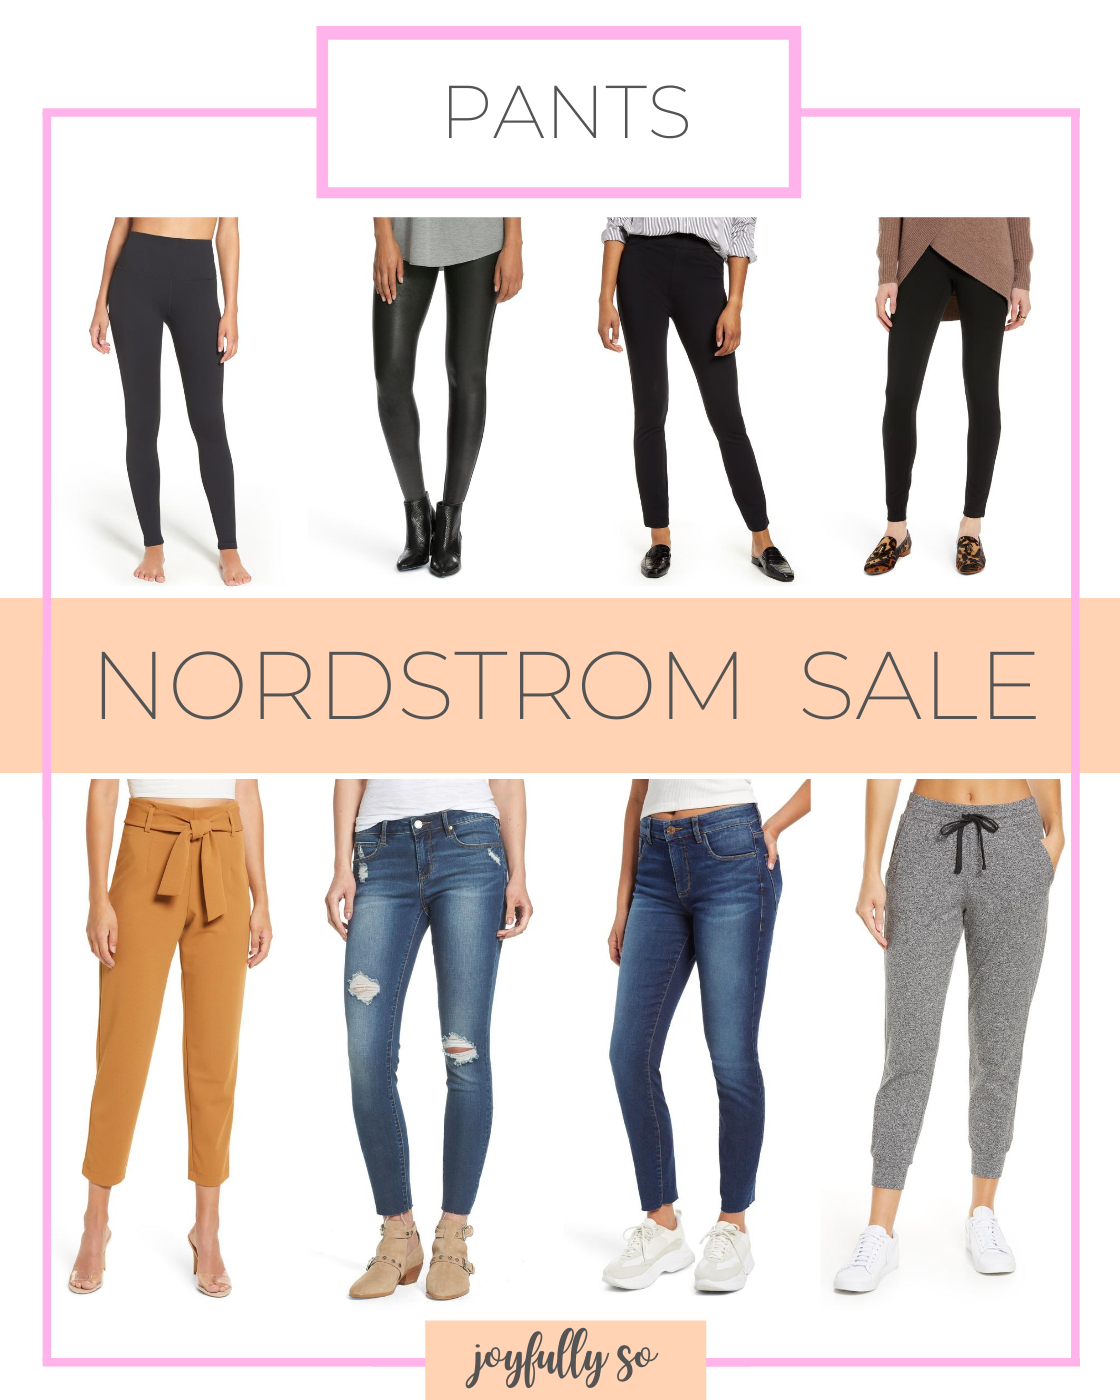 Favorite pants! To celebrate the NSale and the new website layout on Joyfully So, there is a Tory Burch giveaway! Let’s get to the Women’s Nordstrom Anniversary Sale 2020 Shopping Guide!